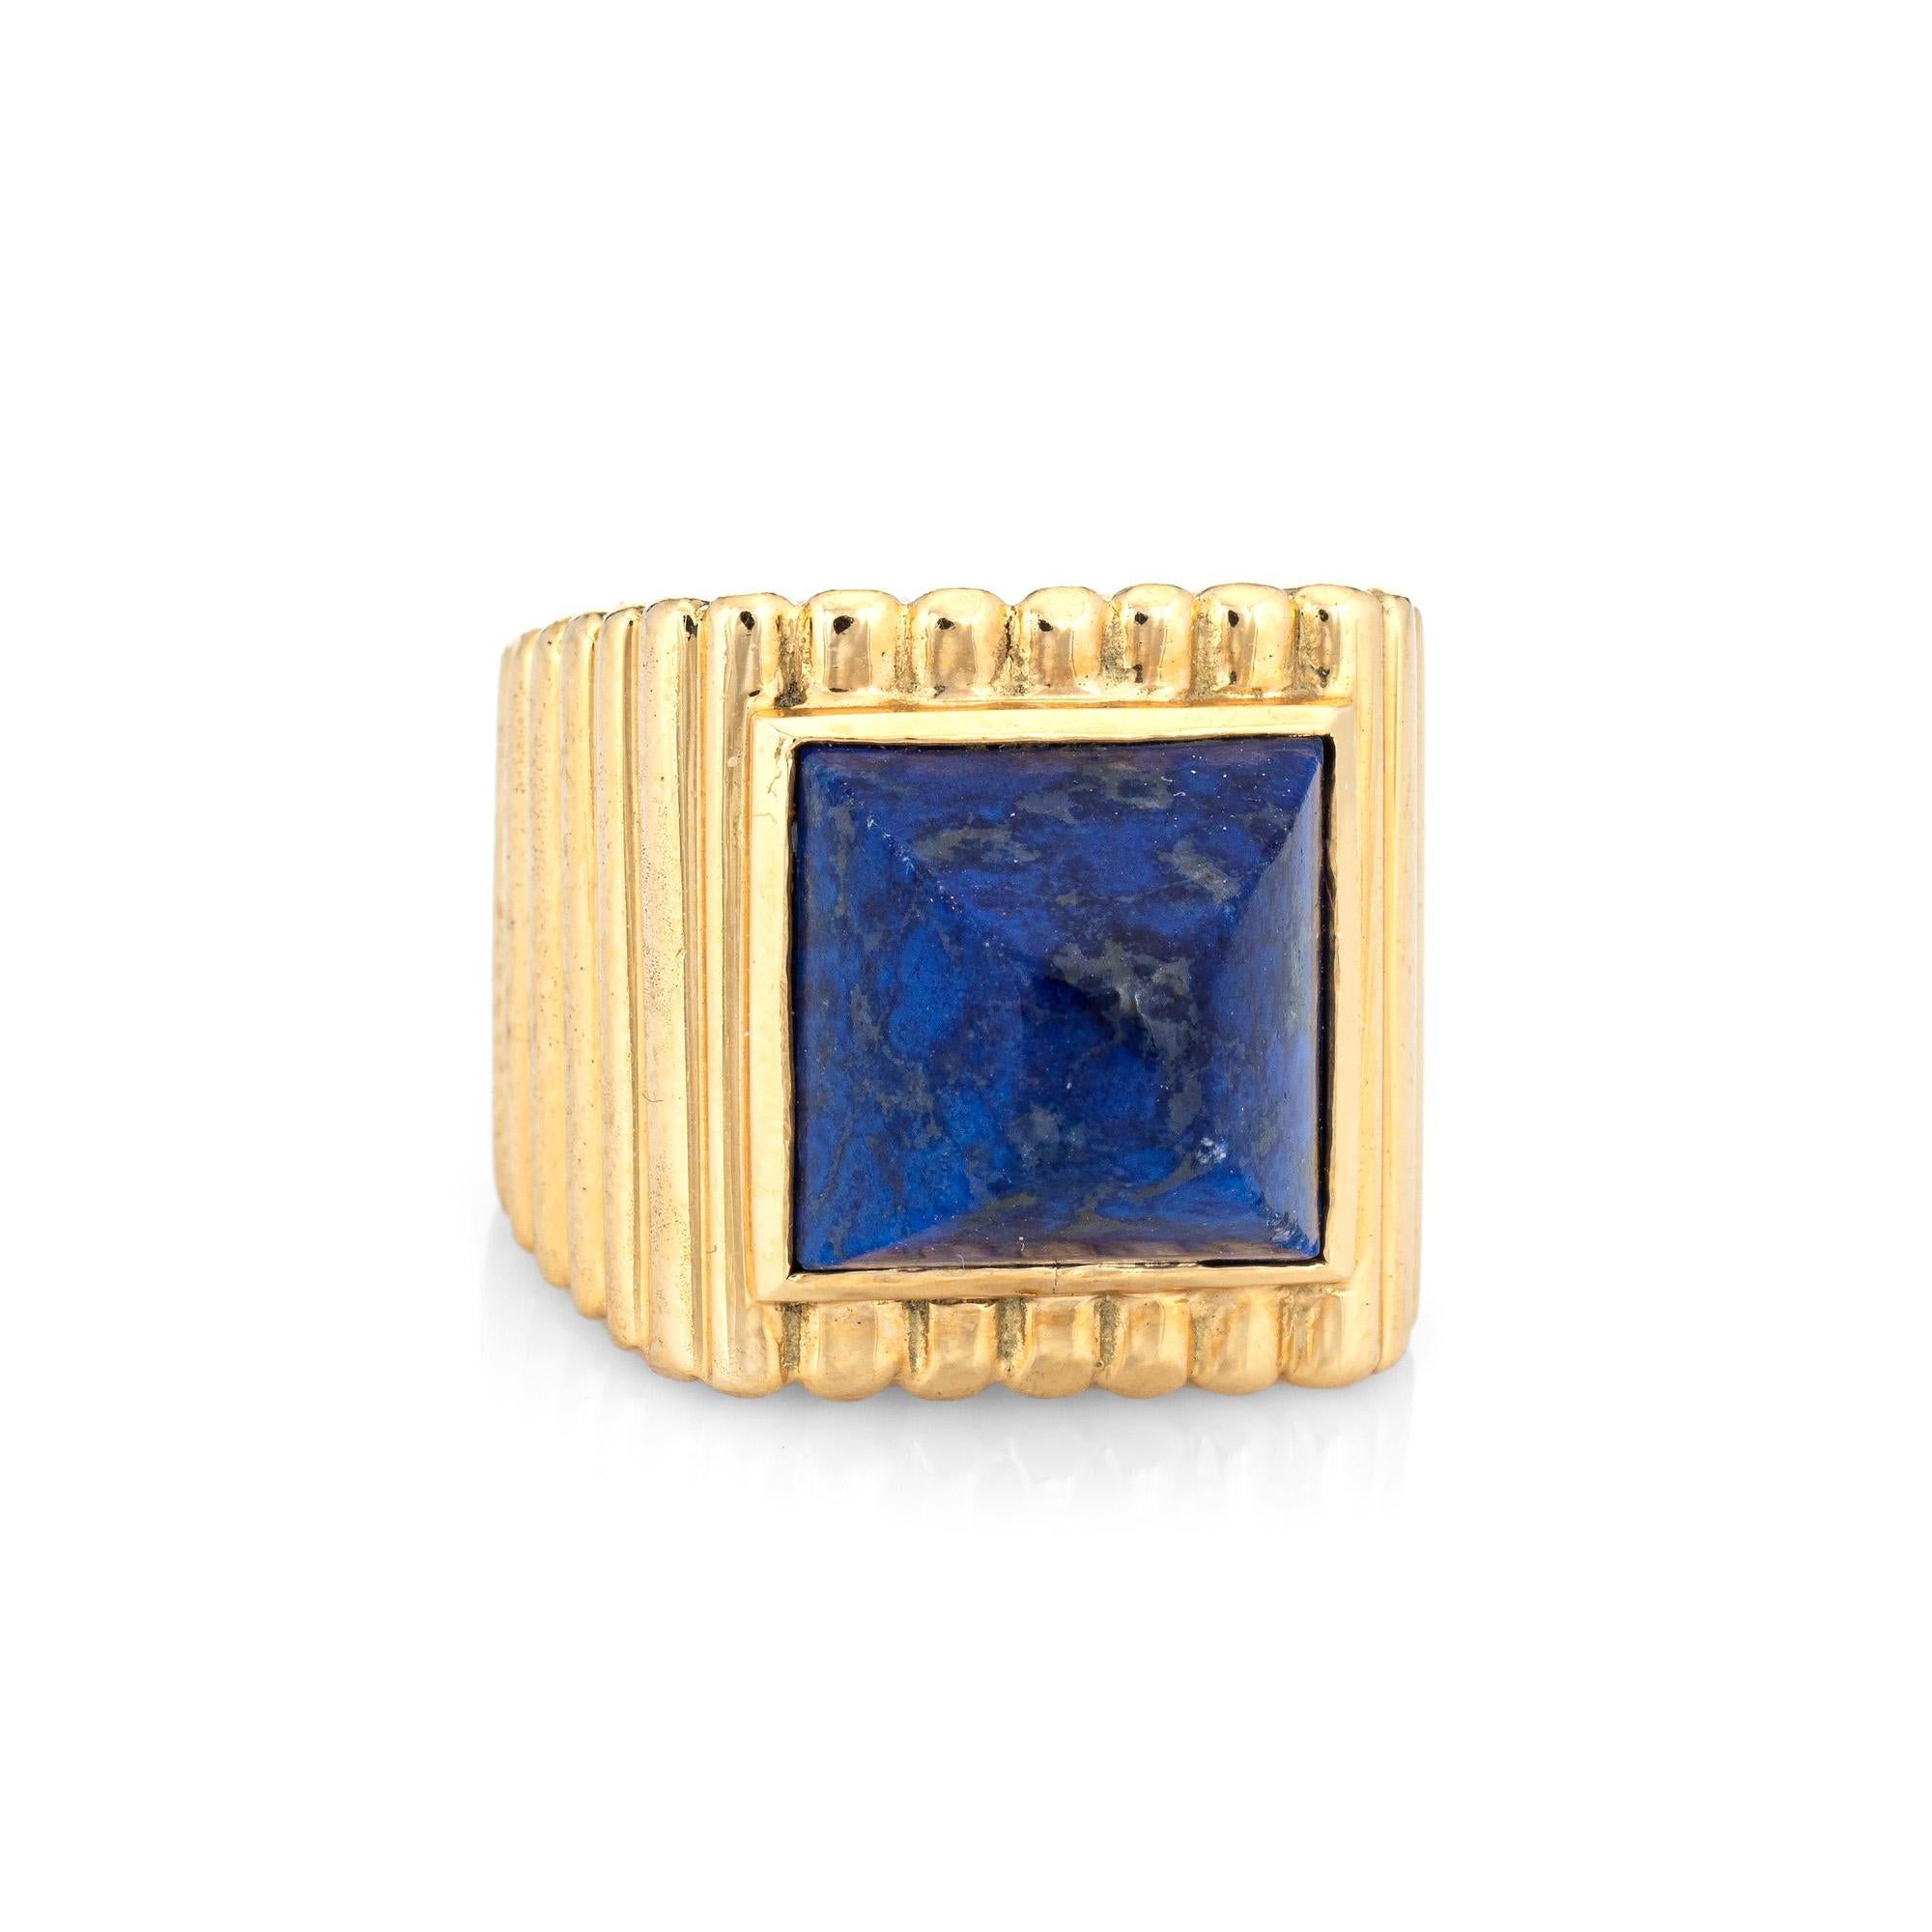 Vintage Tiffany & Co lapis lazuli ring crafted in 18 karat yellow gold (circa 1970s).  

Lapis lazuli measures 11mm diameter. The lapis is in good condition with some minor abrasions visible under a 10x loupe.

Dating to the 1970s the 18k gold ring